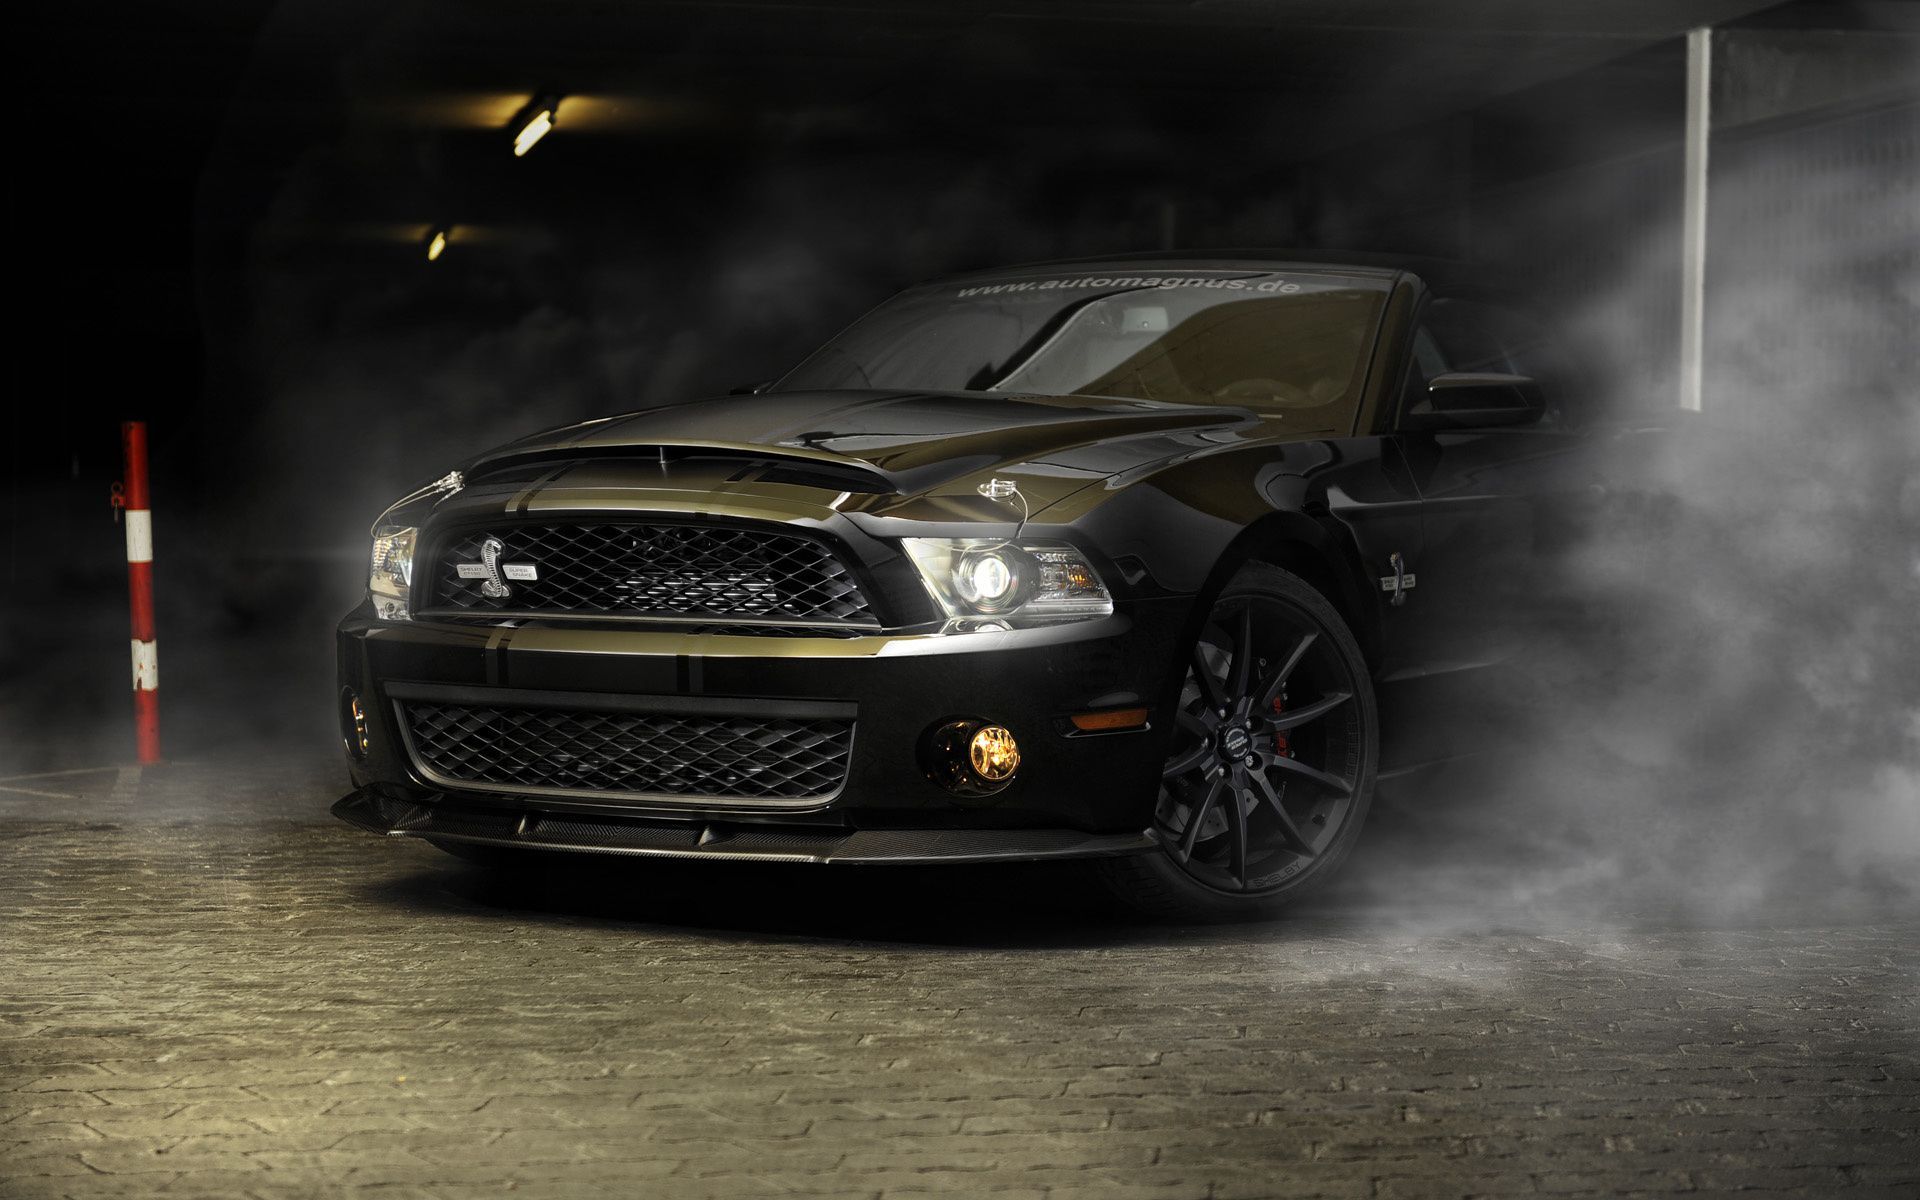 Mustang Wallpapers and Backgrounds 15573 - HD Wallpapers Site